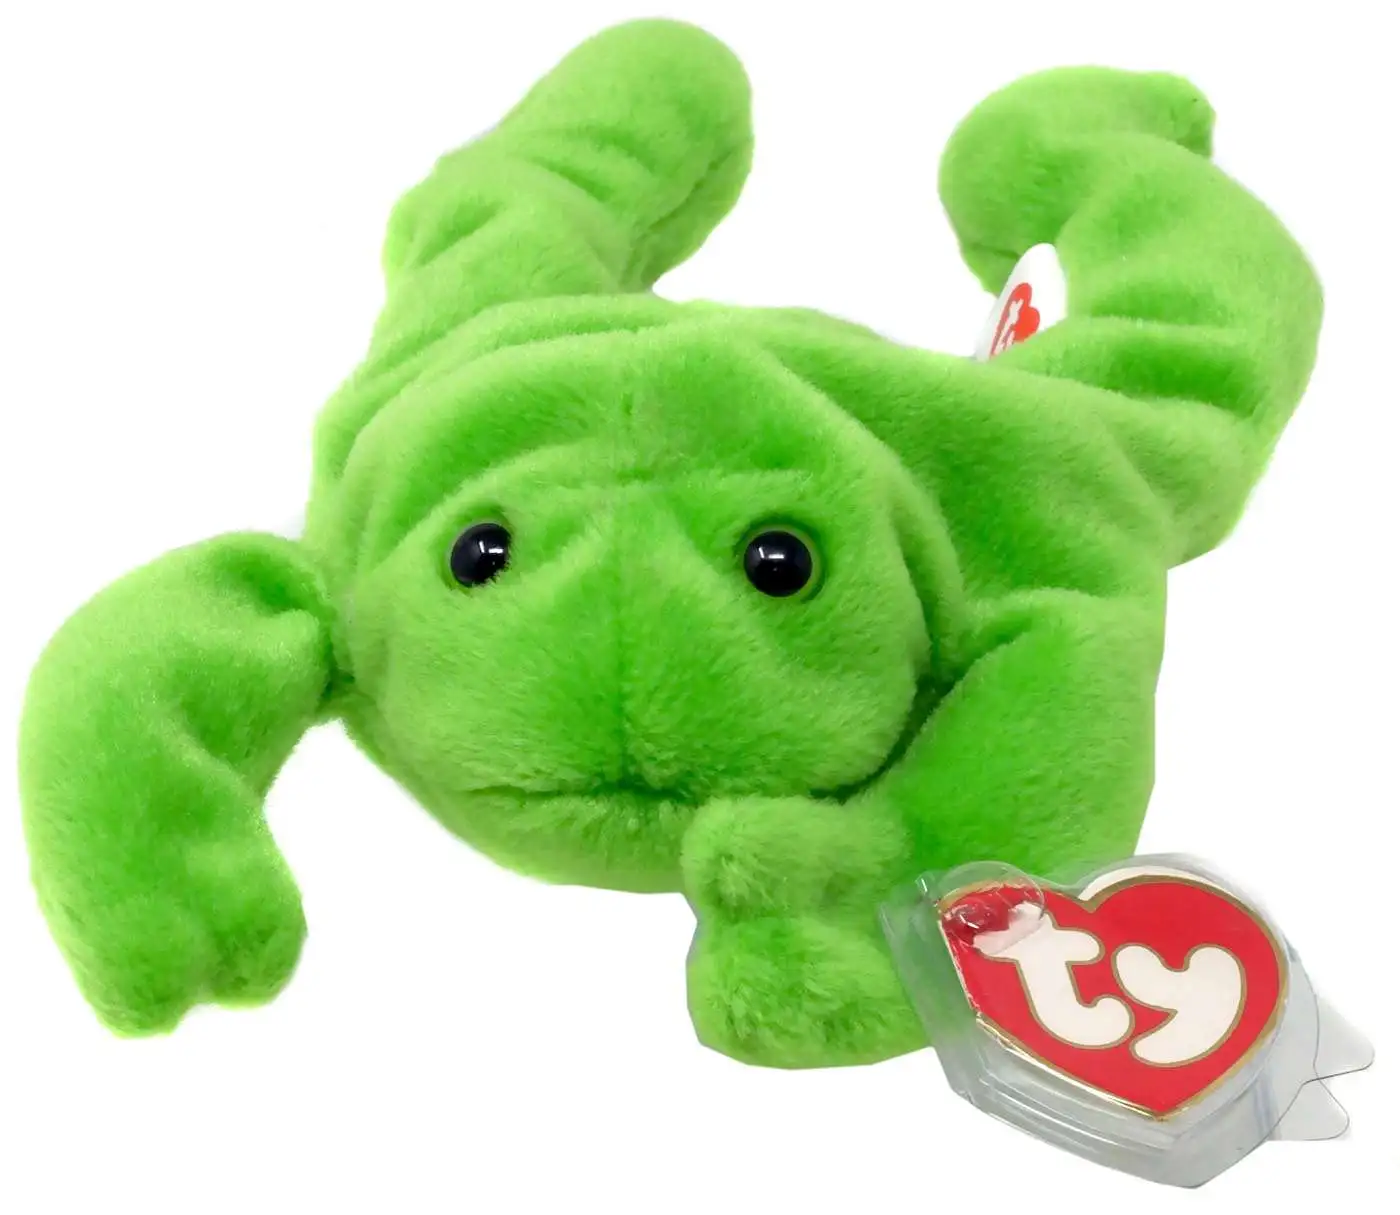 Beanie Babies Legs the Frog Beanie Baby Plush 3rd Gen Hang Tag, 2nd Gen  Tush Tag Ty - ToyWiz